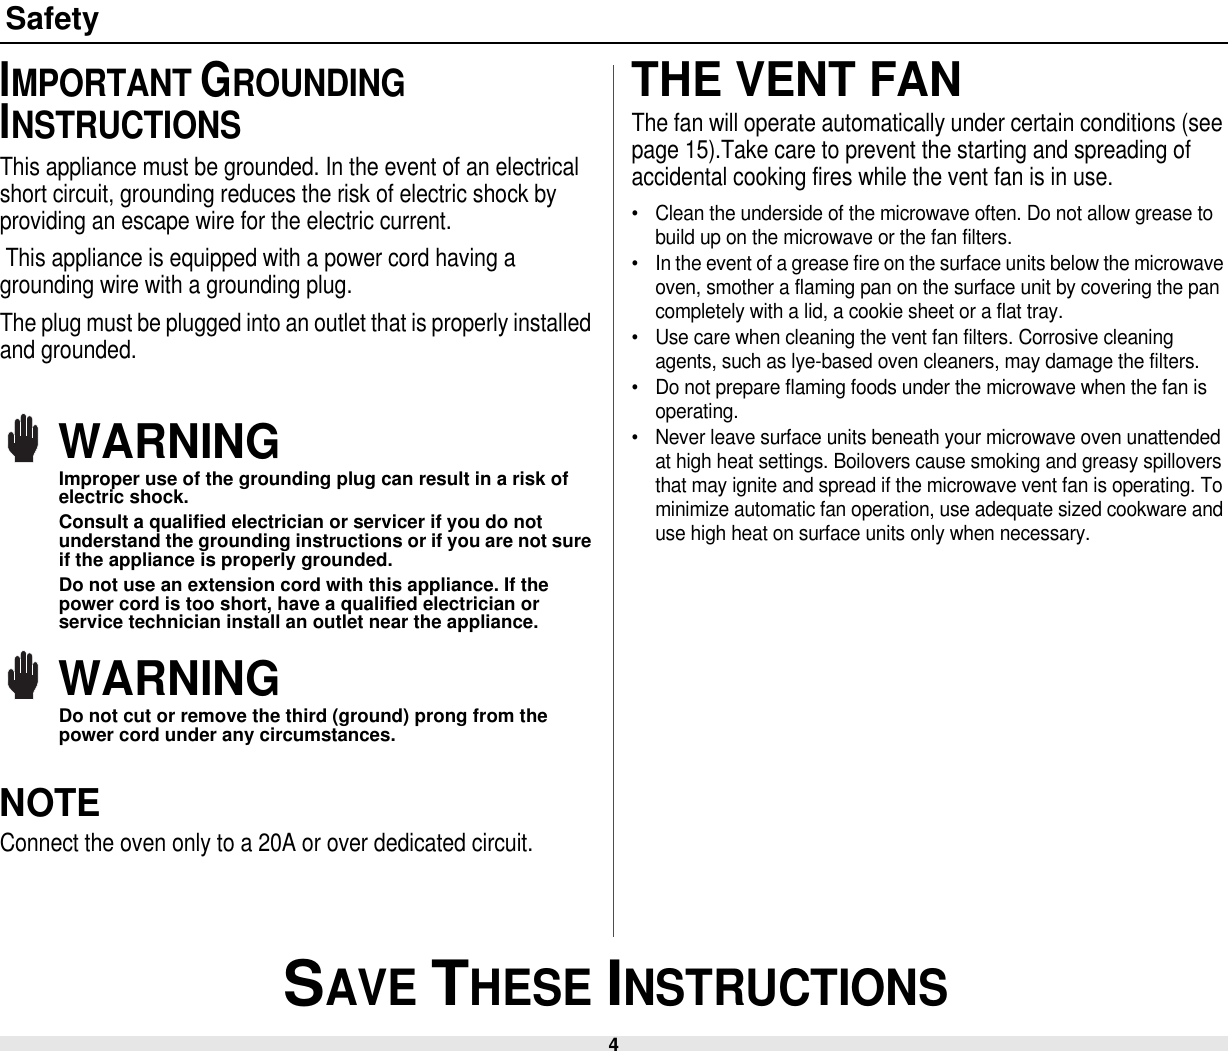 4 SAVE THESE INSTRUCTIONSSafetyIMPORTANT GROUNDING INSTRUCTIONSThis appliance must be grounded. In the event of an electrical short circuit, grounding reduces the risk of electric shock by providing an escape wire for the electric current. This appliance is equipped with a power cord having a grounding wire with a grounding plug. The plug must be plugged into an outlet that is properly installed and grounded.WARNINGImproper use of the grounding plug can result in a risk of electric shock.Consult a qualified electrician or servicer if you do not understand the grounding instructions or if you are not sure if the appliance is properly grounded.Do not use an extension cord with this appliance. If the power cord is too short, have a qualified electrician or service technician install an outlet near the appliance.WARNINGDo not cut or remove the third (ground) prong from the power cord under any circumstances.NOTEConnect the oven only to a 20A or over dedicated circuit. THE VENT FANThe fan will operate automatically under certain conditions (see page 15).Take care to prevent the starting and spreading of accidental cooking fires while the vent fan is in use.• Clean the underside of the microwave often. Do not allow grease to build up on the microwave or the fan filters.• In the event of a grease fire on the surface units below the microwave oven, smother a flaming pan on the surface unit by covering the pan completely with a lid, a cookie sheet or a flat tray.• Use care when cleaning the vent fan filters. Corrosive cleaning agents, such as lye-based oven cleaners, may damage the filters.• Do not prepare flaming foods under the microwave when the fan is operating.• Never leave surface units beneath your microwave oven unattended at high heat settings. Boilovers cause smoking and greasy spillovers that may ignite and spread if the microwave vent fan is operating. To minimize automatic fan operation, use adequate sized cookware and use high heat on surface units only when necessary.